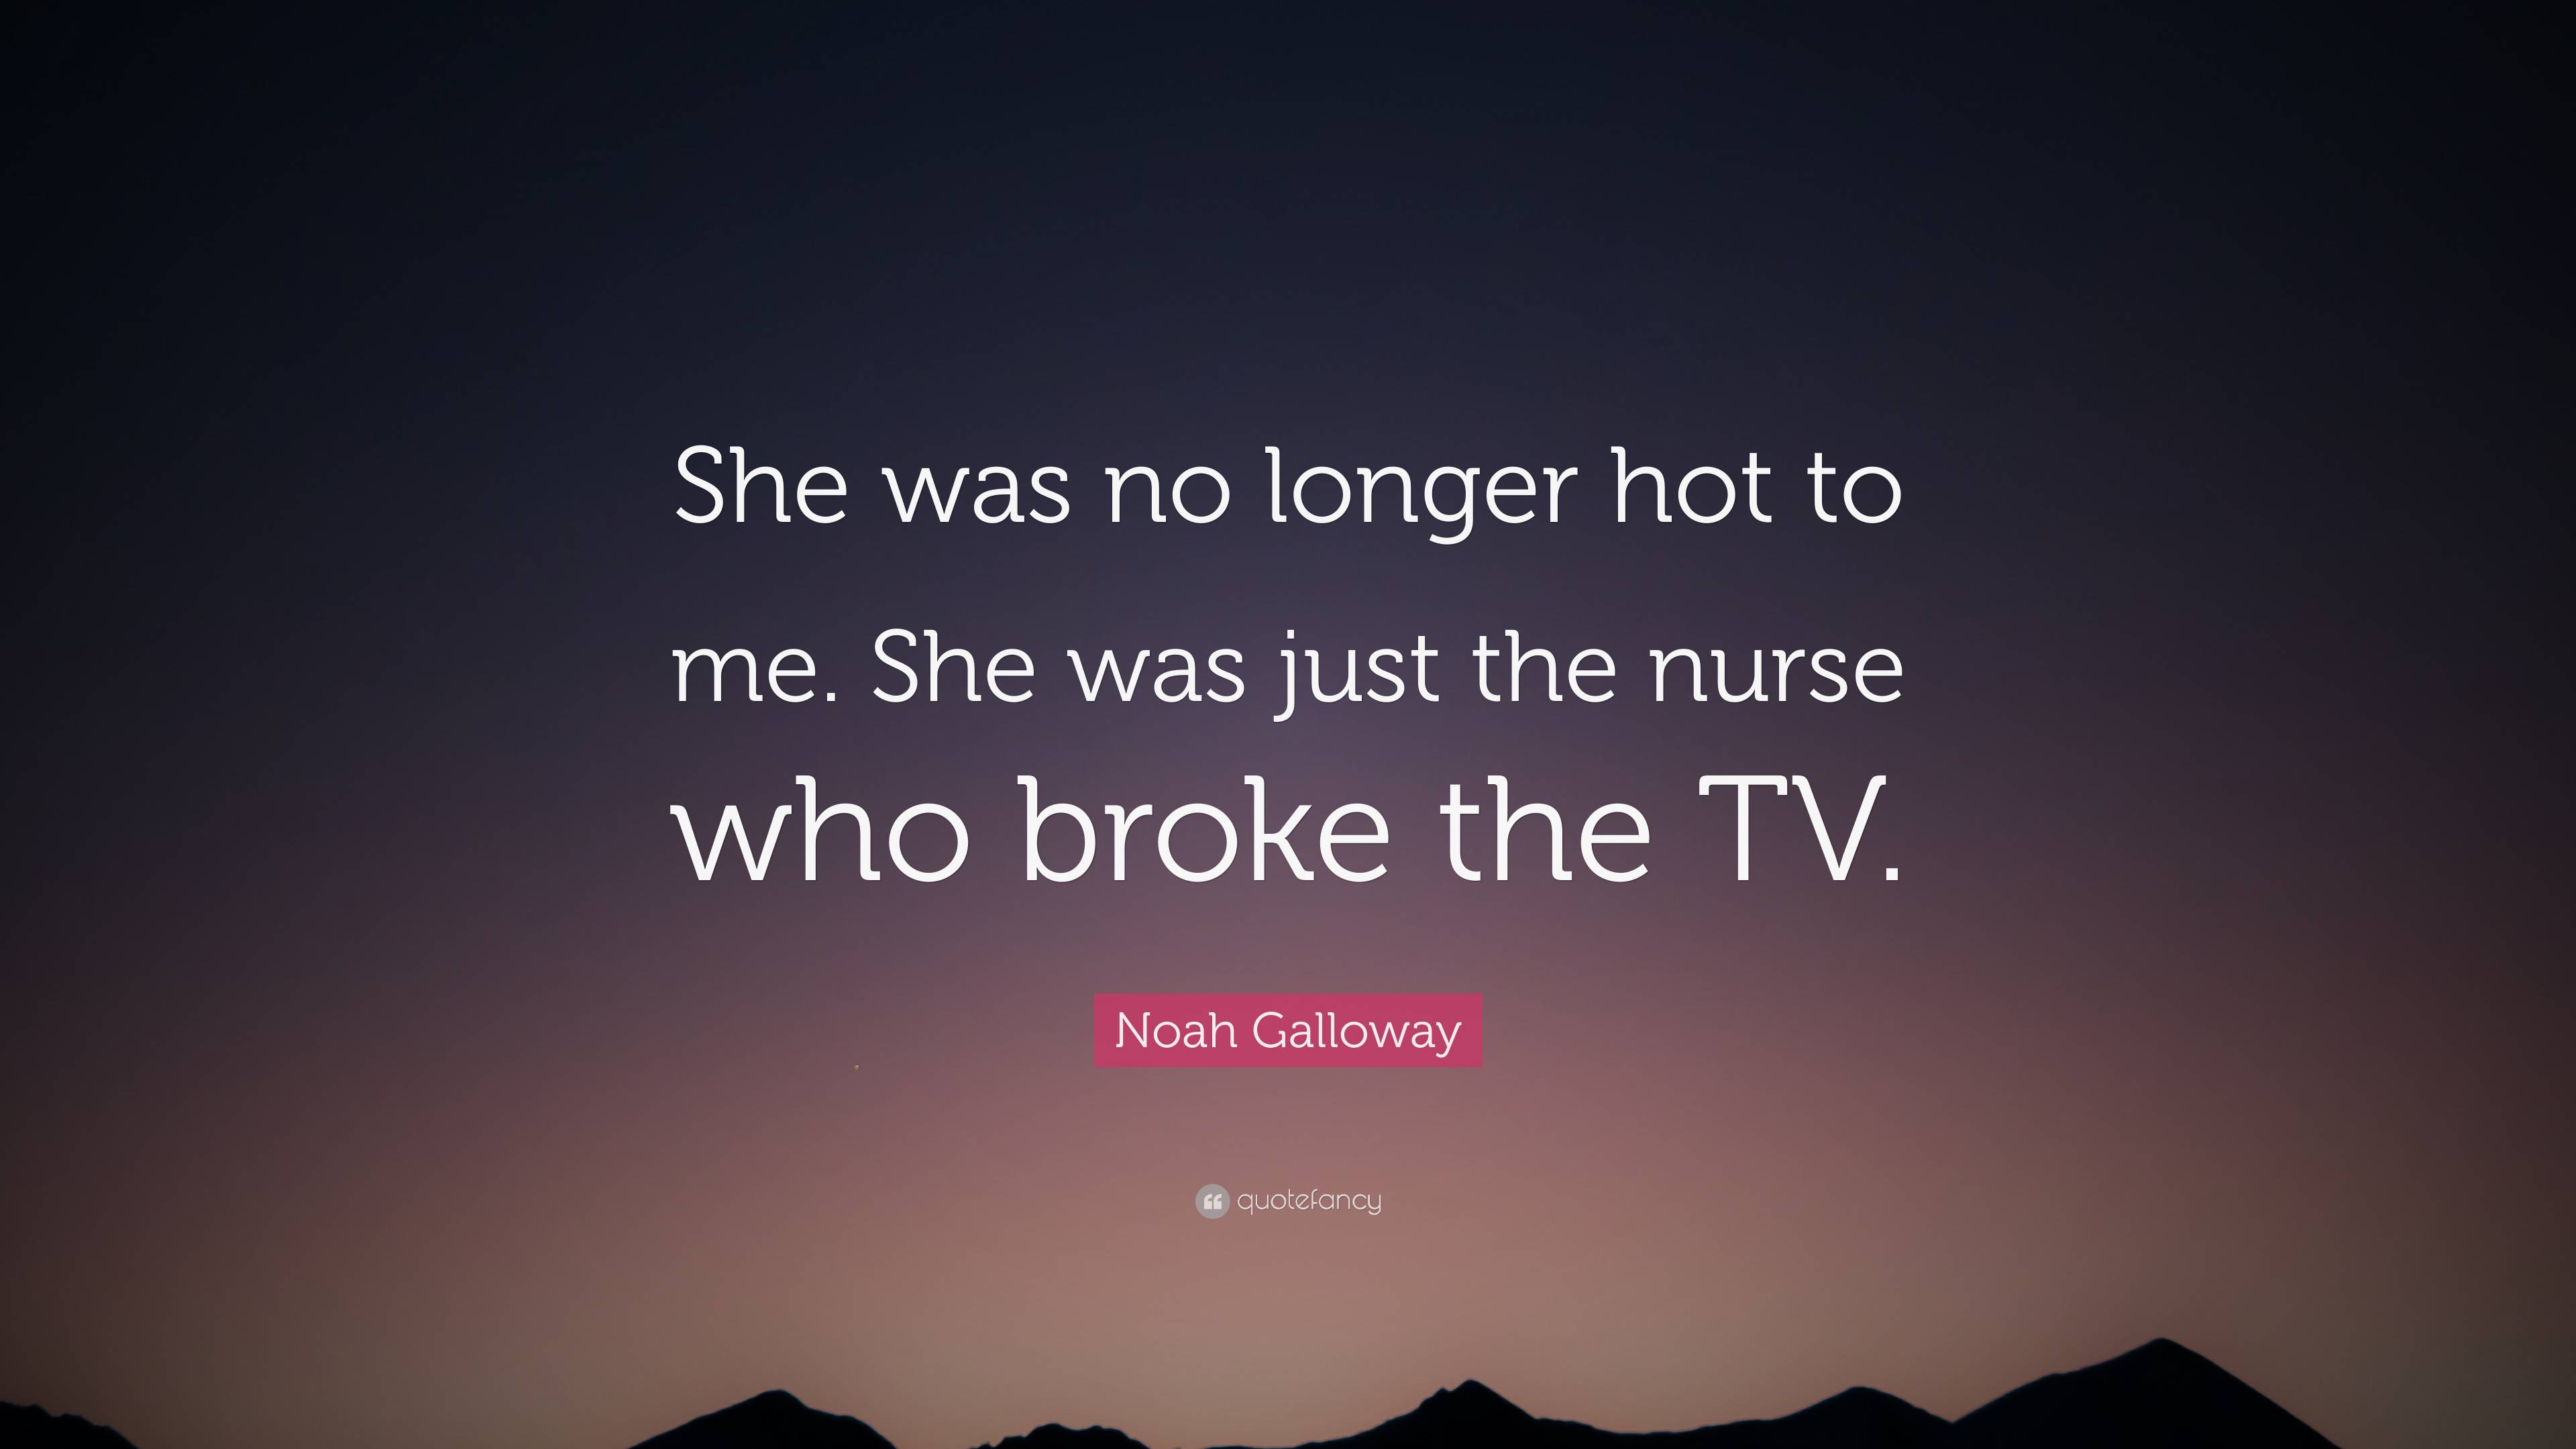 Noah Galloway Quote: “She was no longer hot to me. She was just the ...